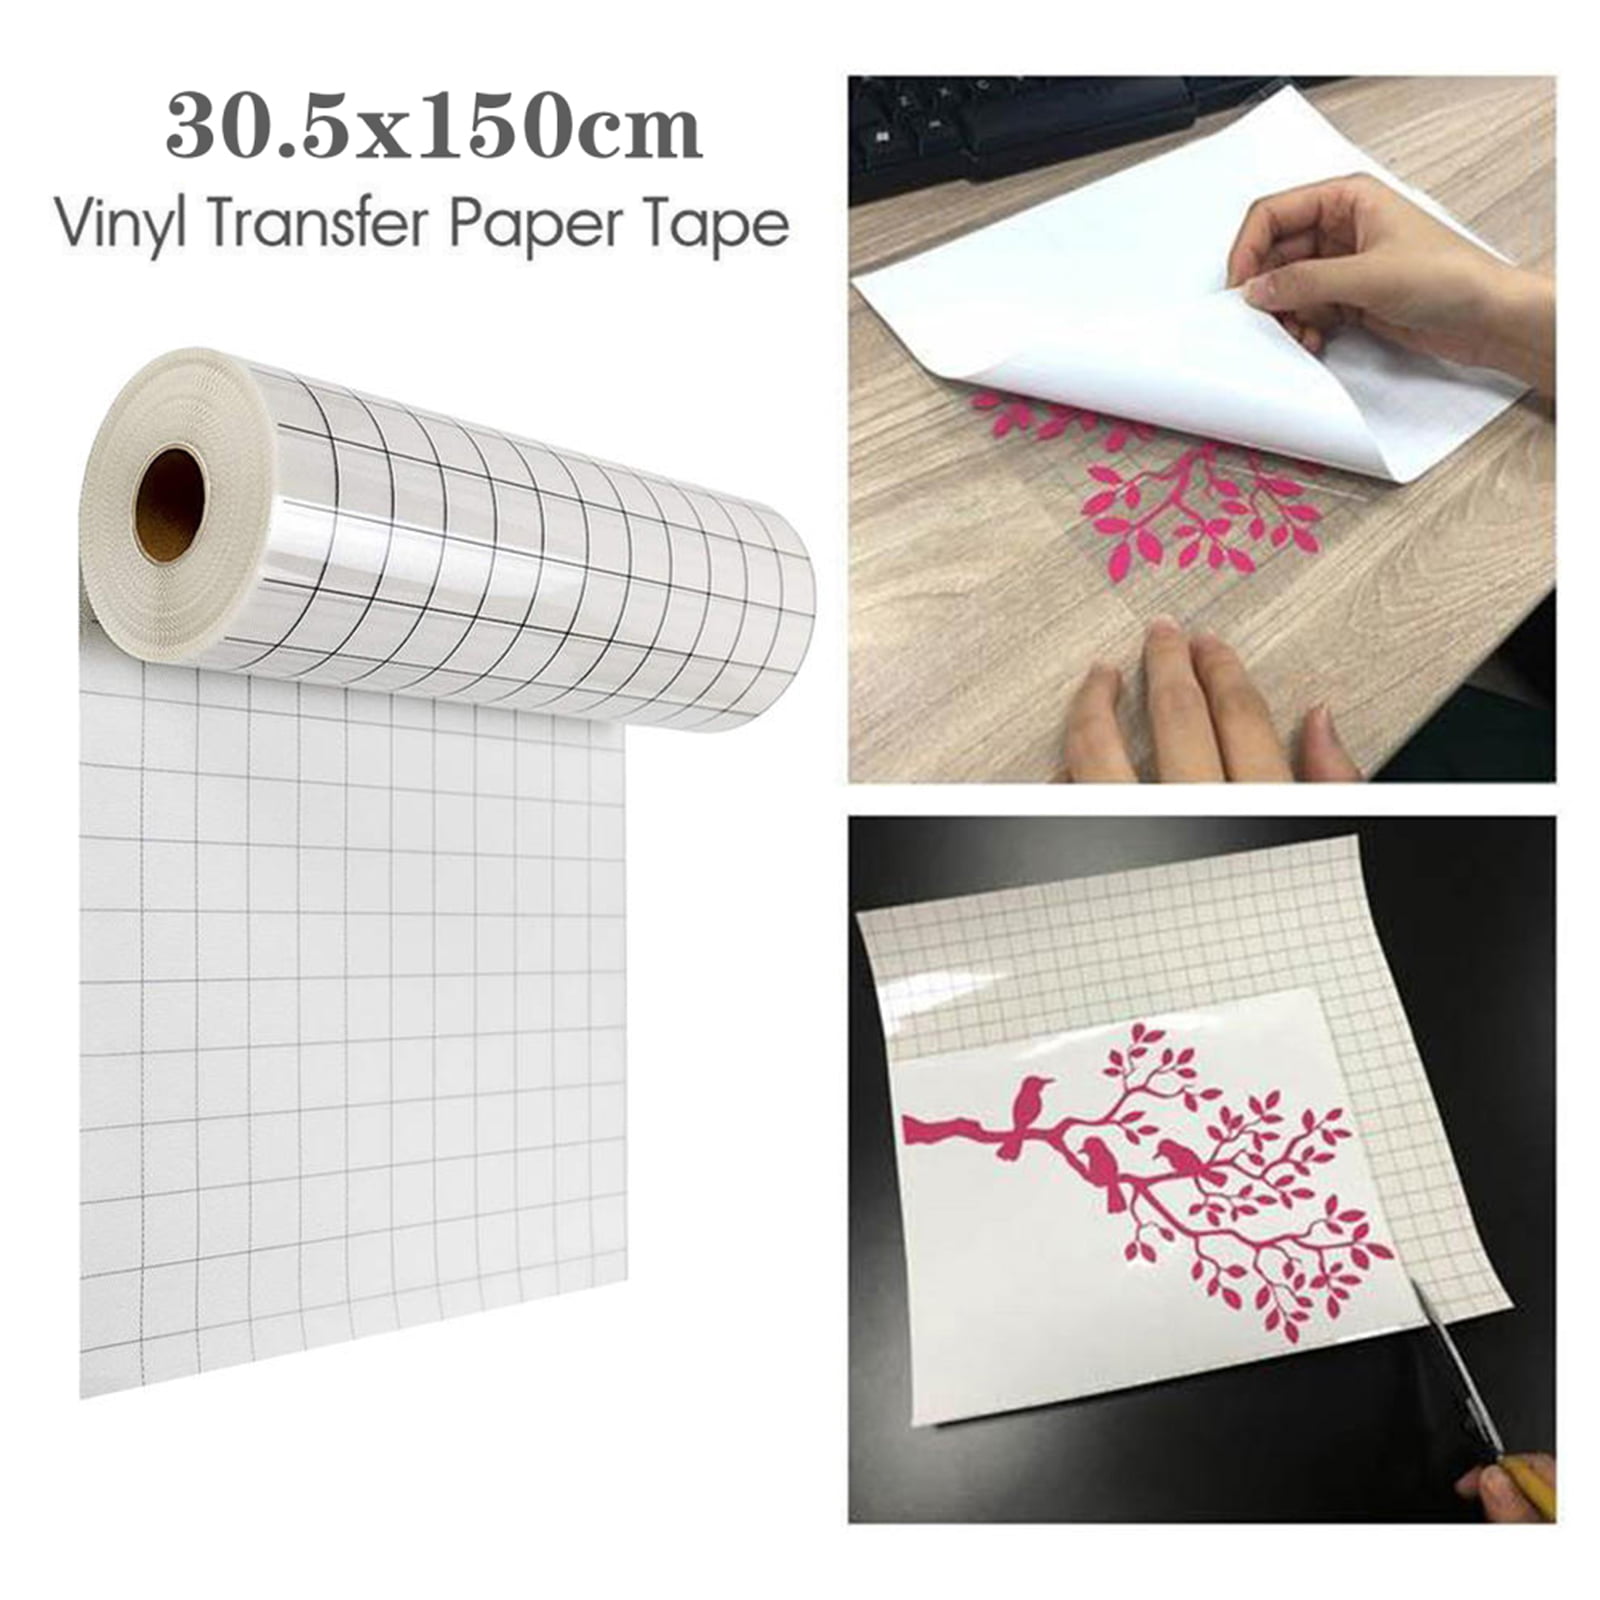 40FT Transfer Tape for Vinyl - Clear Vinyl Transfer Paper Tape Roll, 12” x  40 FT with 1/2 Red Grid Standard Tape for Cricut Adhesive Vinyl for Craft